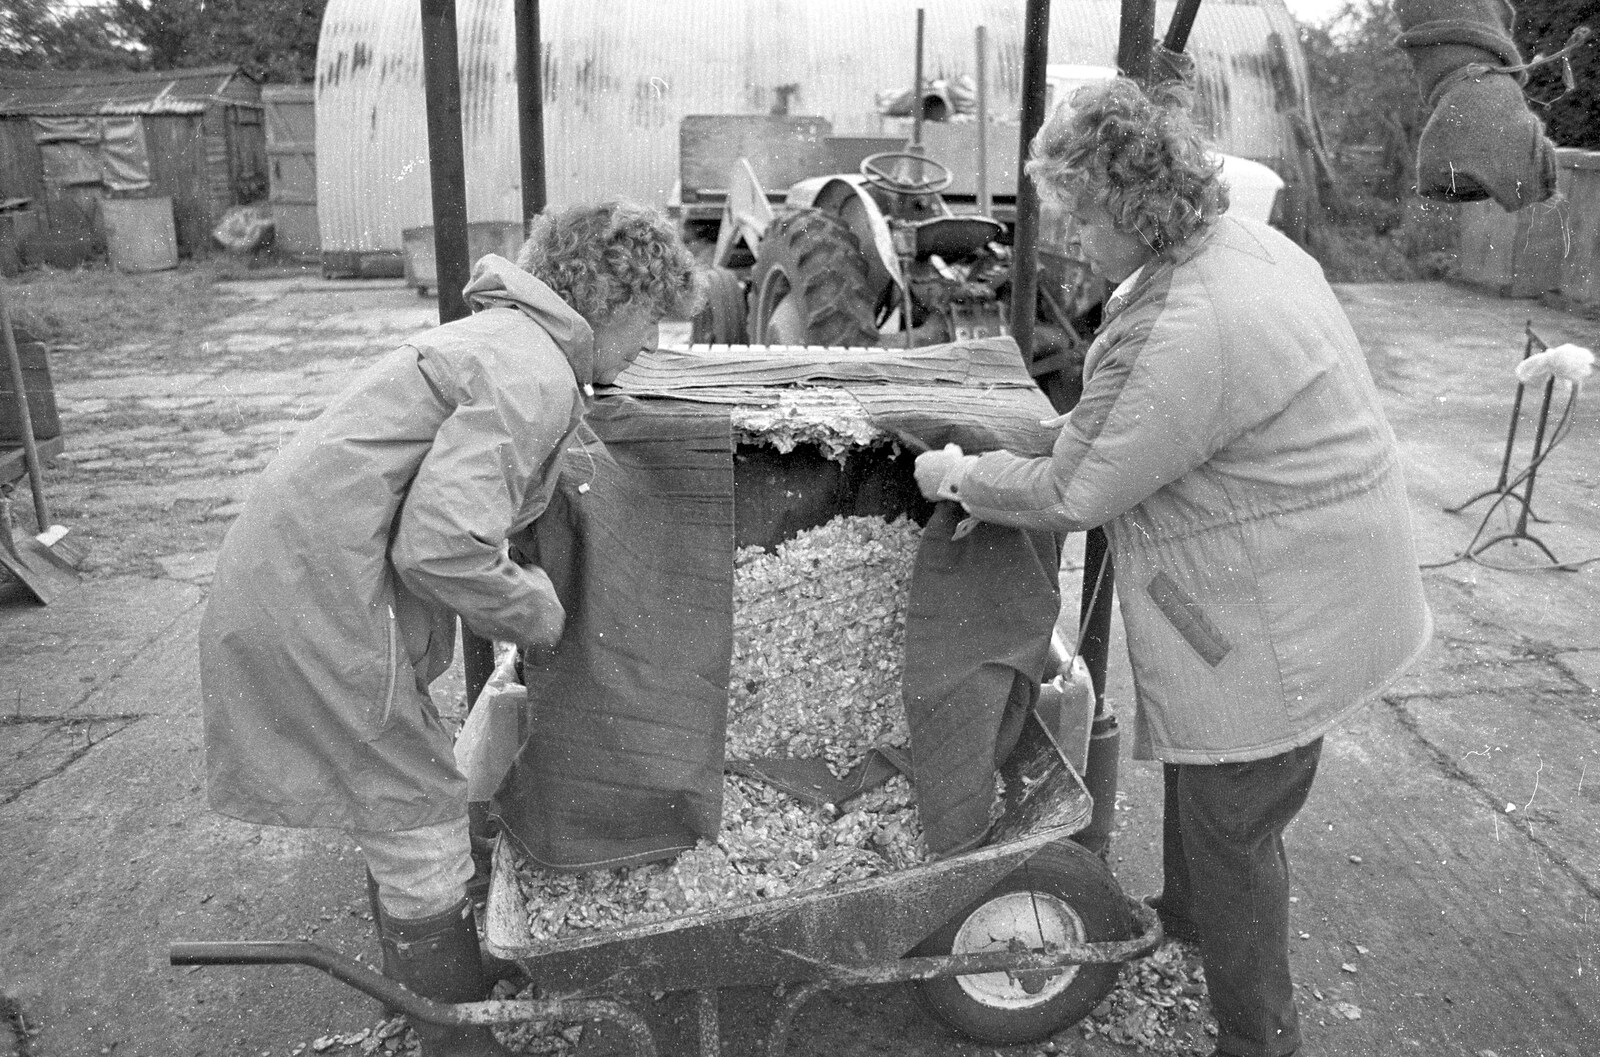 More pressed apple from Cider Making in Black and White, Stuston, Suffolk - 11th October 1992